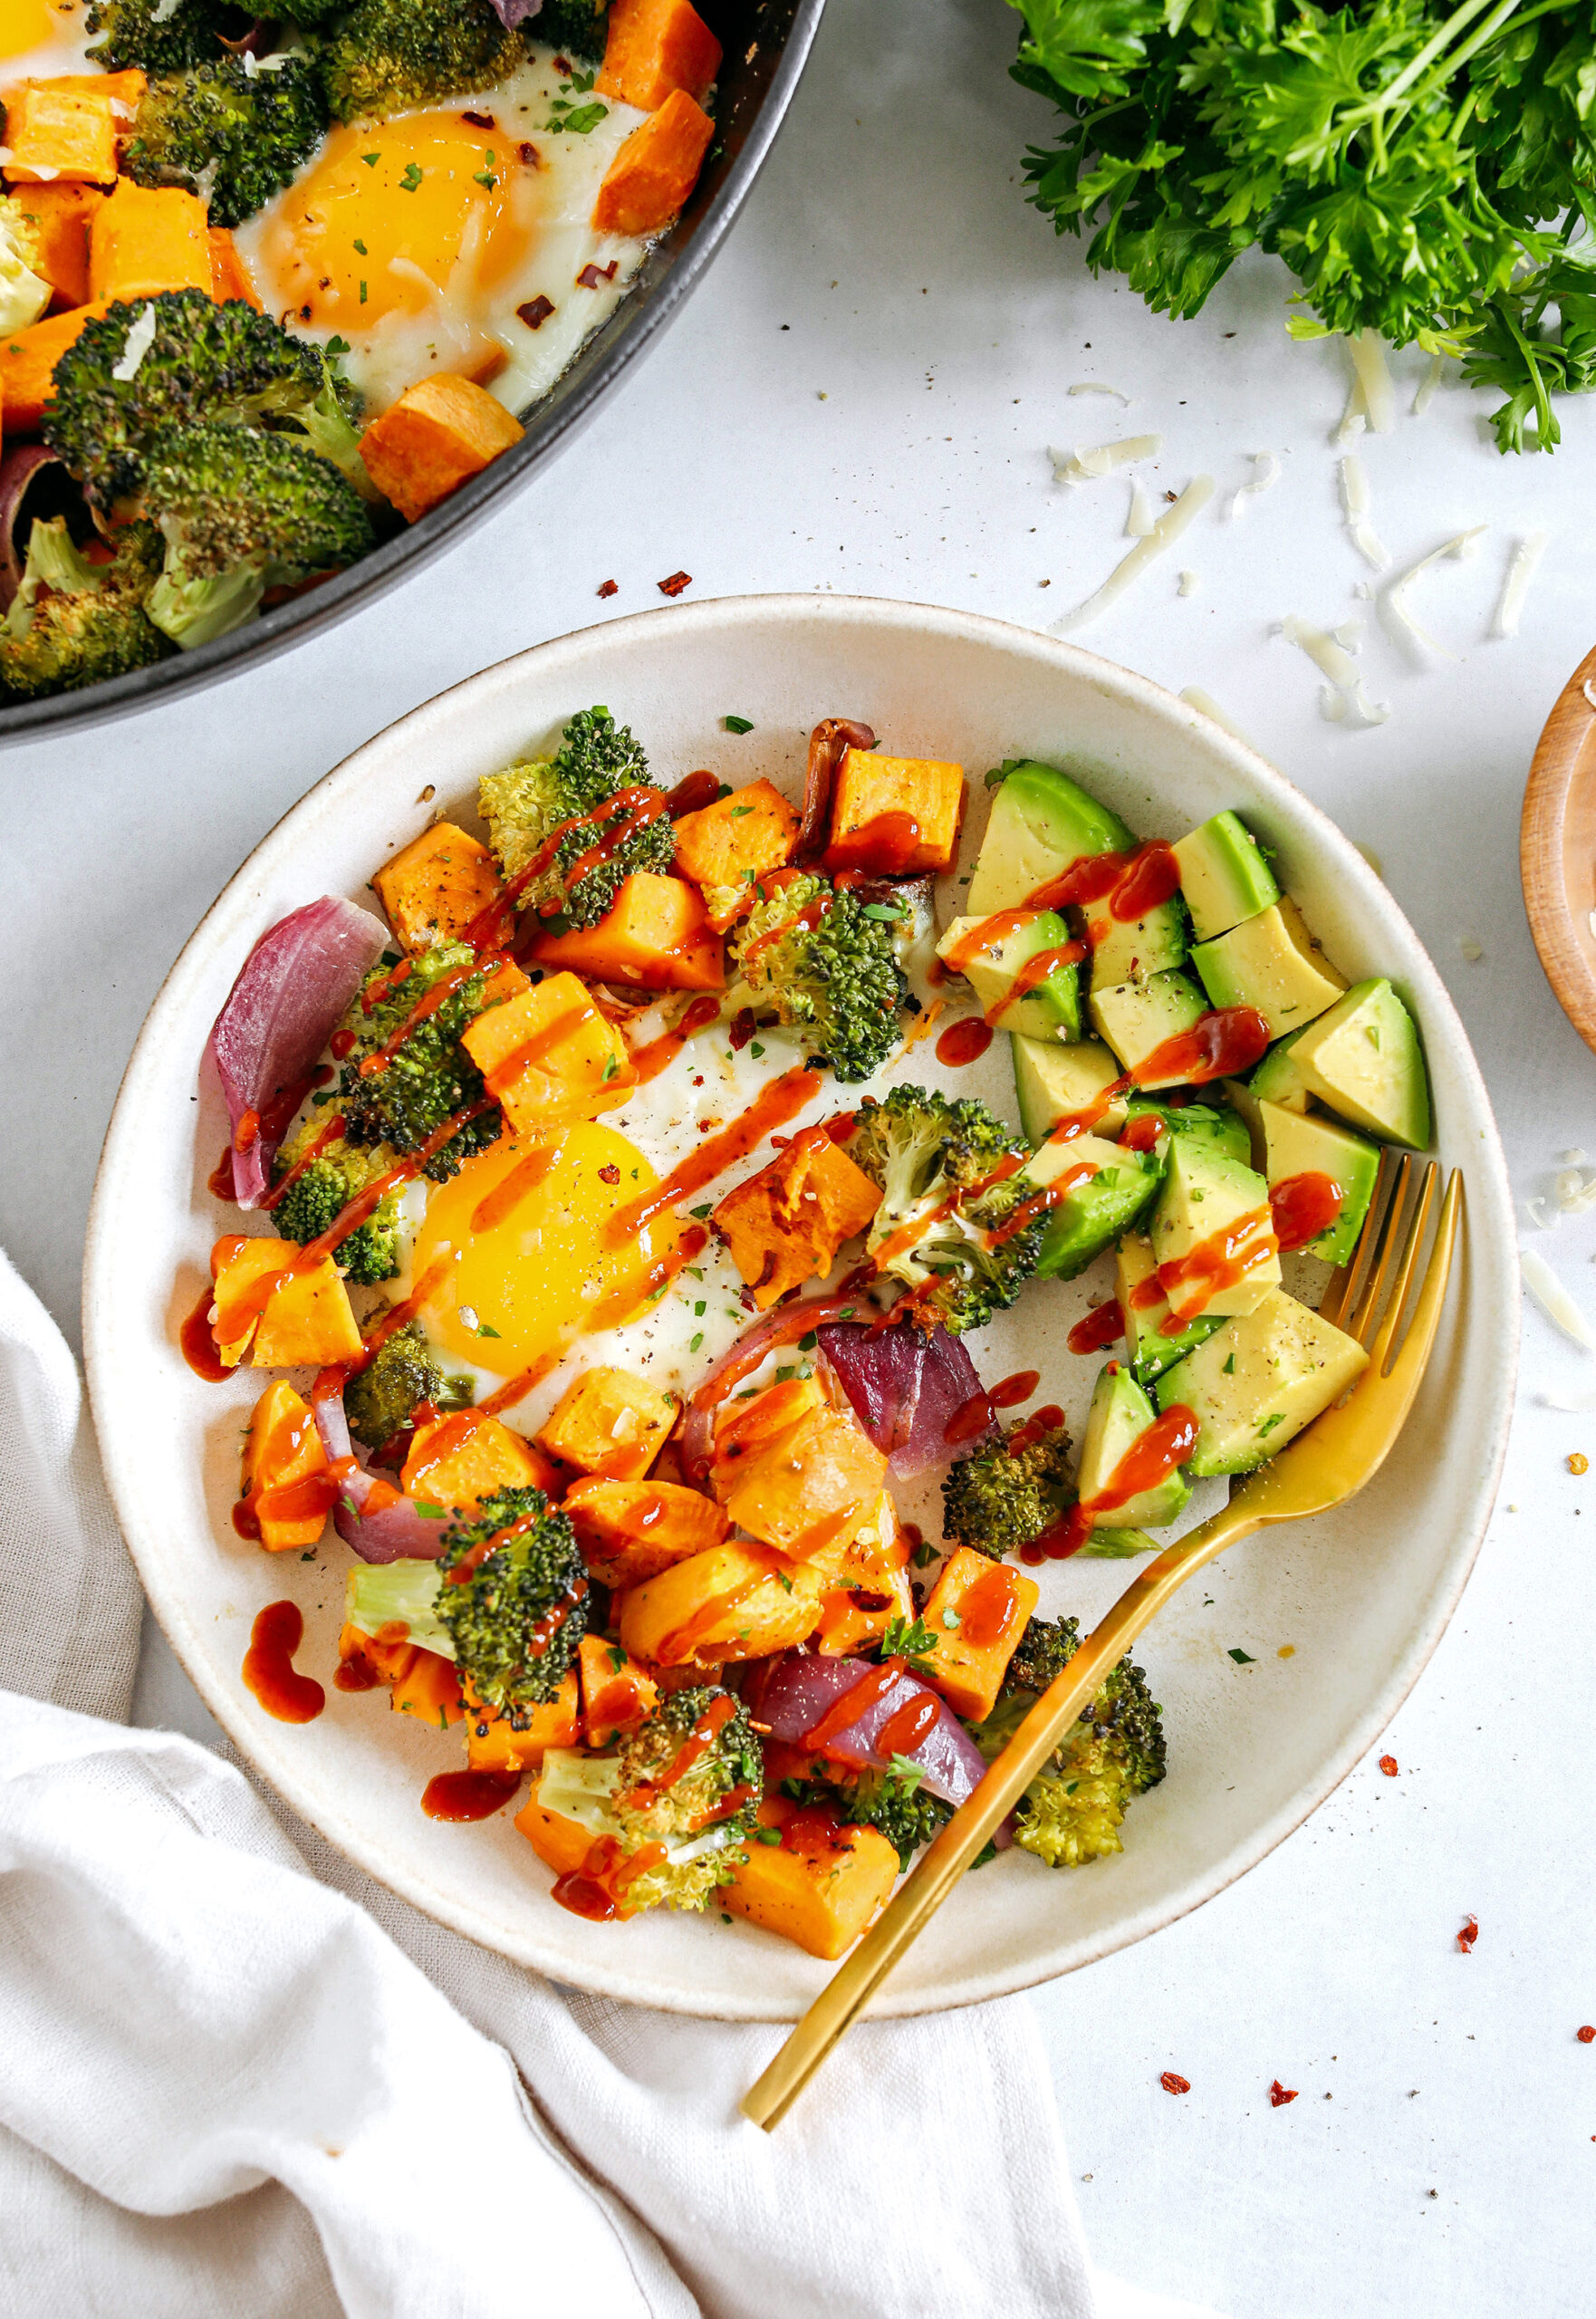 Roasted Veggie Breakfast Skillet made all in one pan with a hearty combination of sweet potatoes, broccoli and red onion topped with baked eggs and seasoned to perfection for a healthy delicious breakfast or dinner!